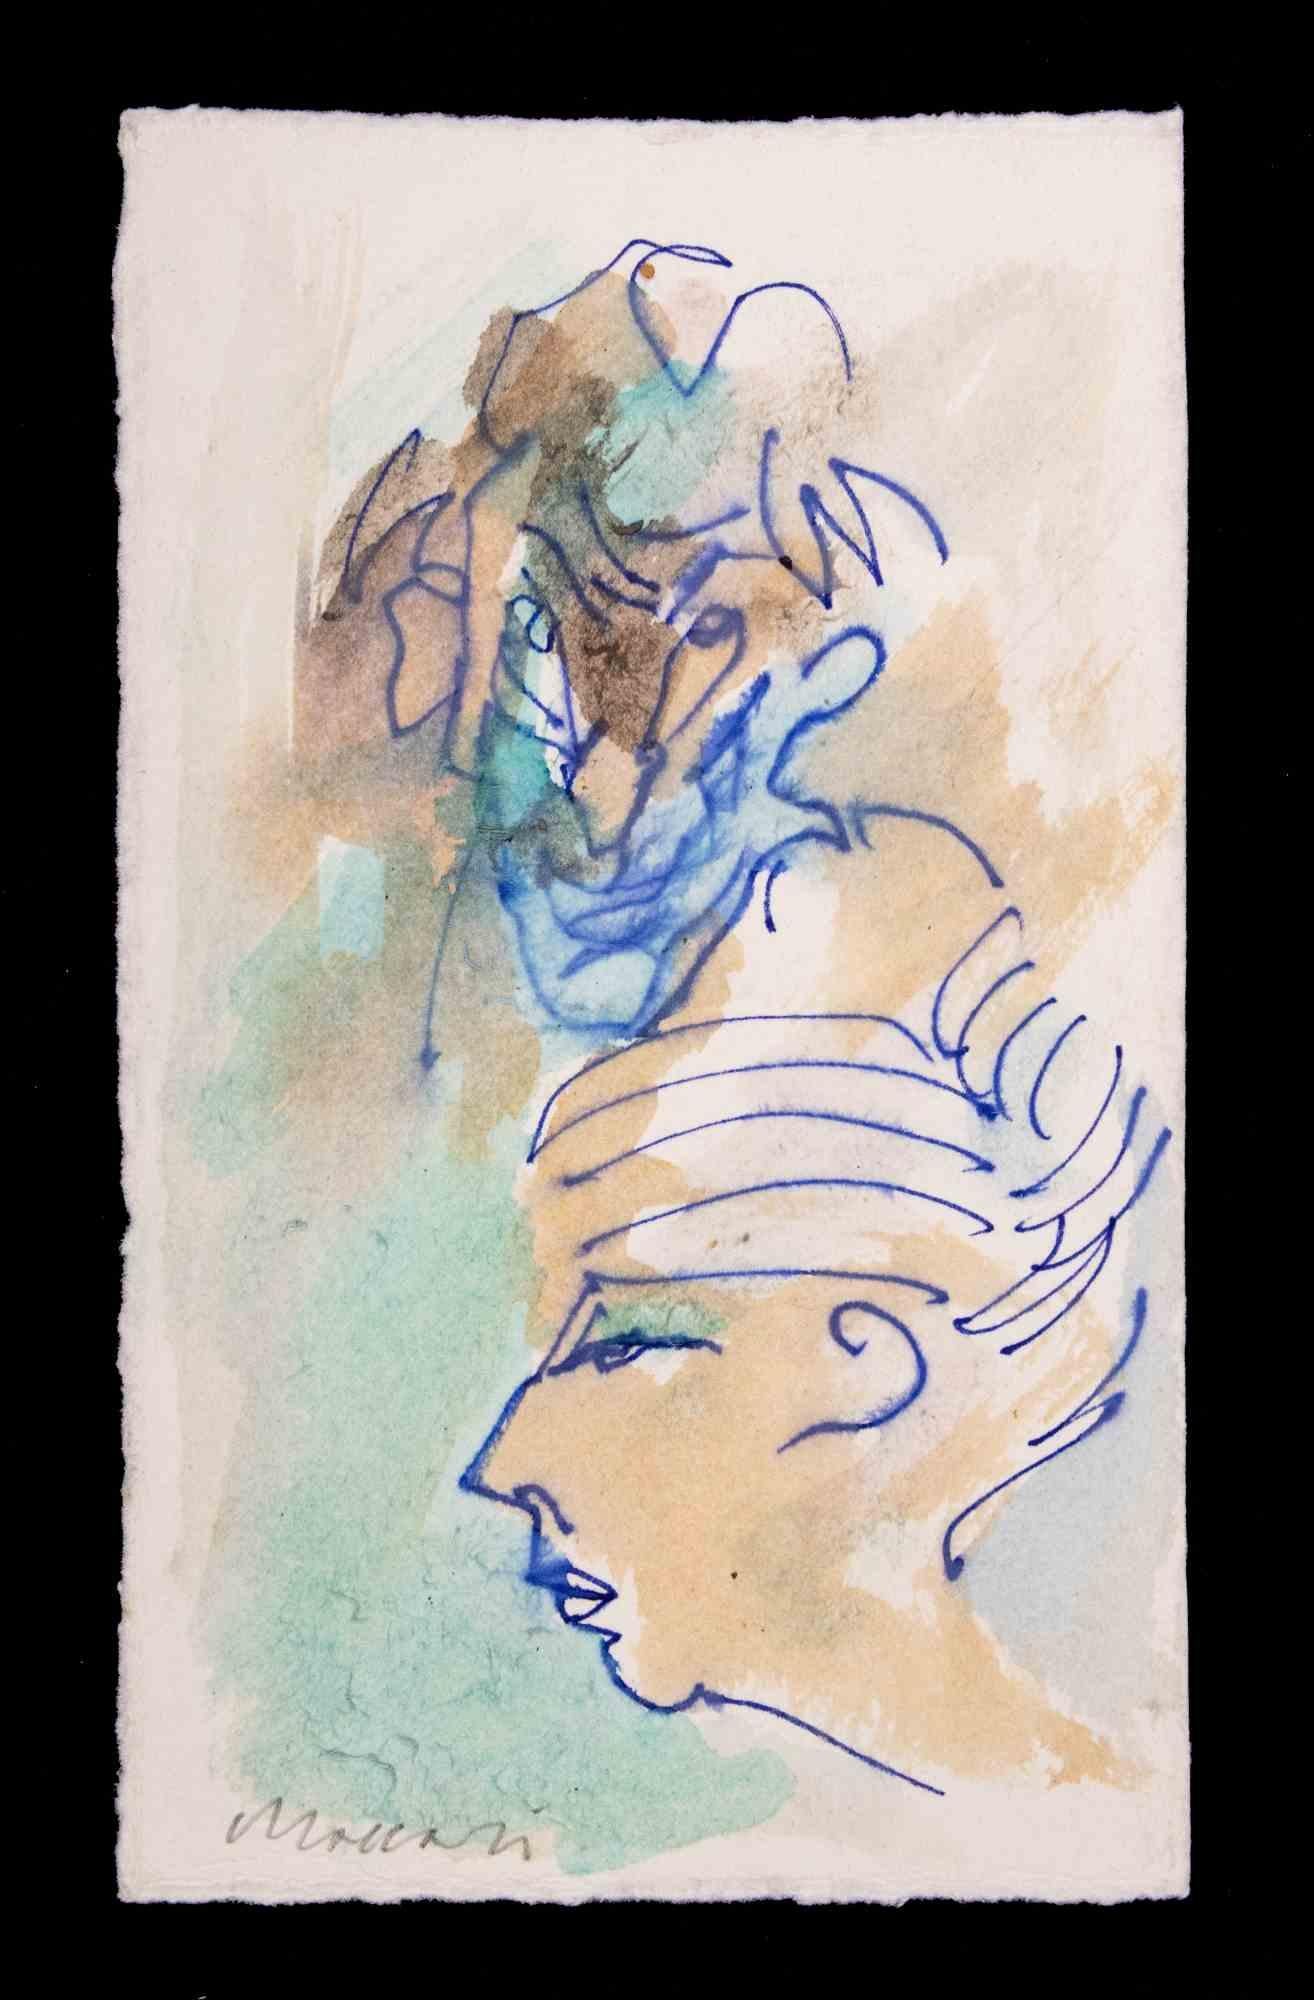 The Modern Couple is a Watercolor and Pen Drawing realized by Mino Maccari (1924-1989) in 1980s.

Hand signed on the lower margin.

Good condition on a yellowed paper.

Mino Maccari (Siena, 1924-Rome, June 16, 1989) was an Italian writer, painter,